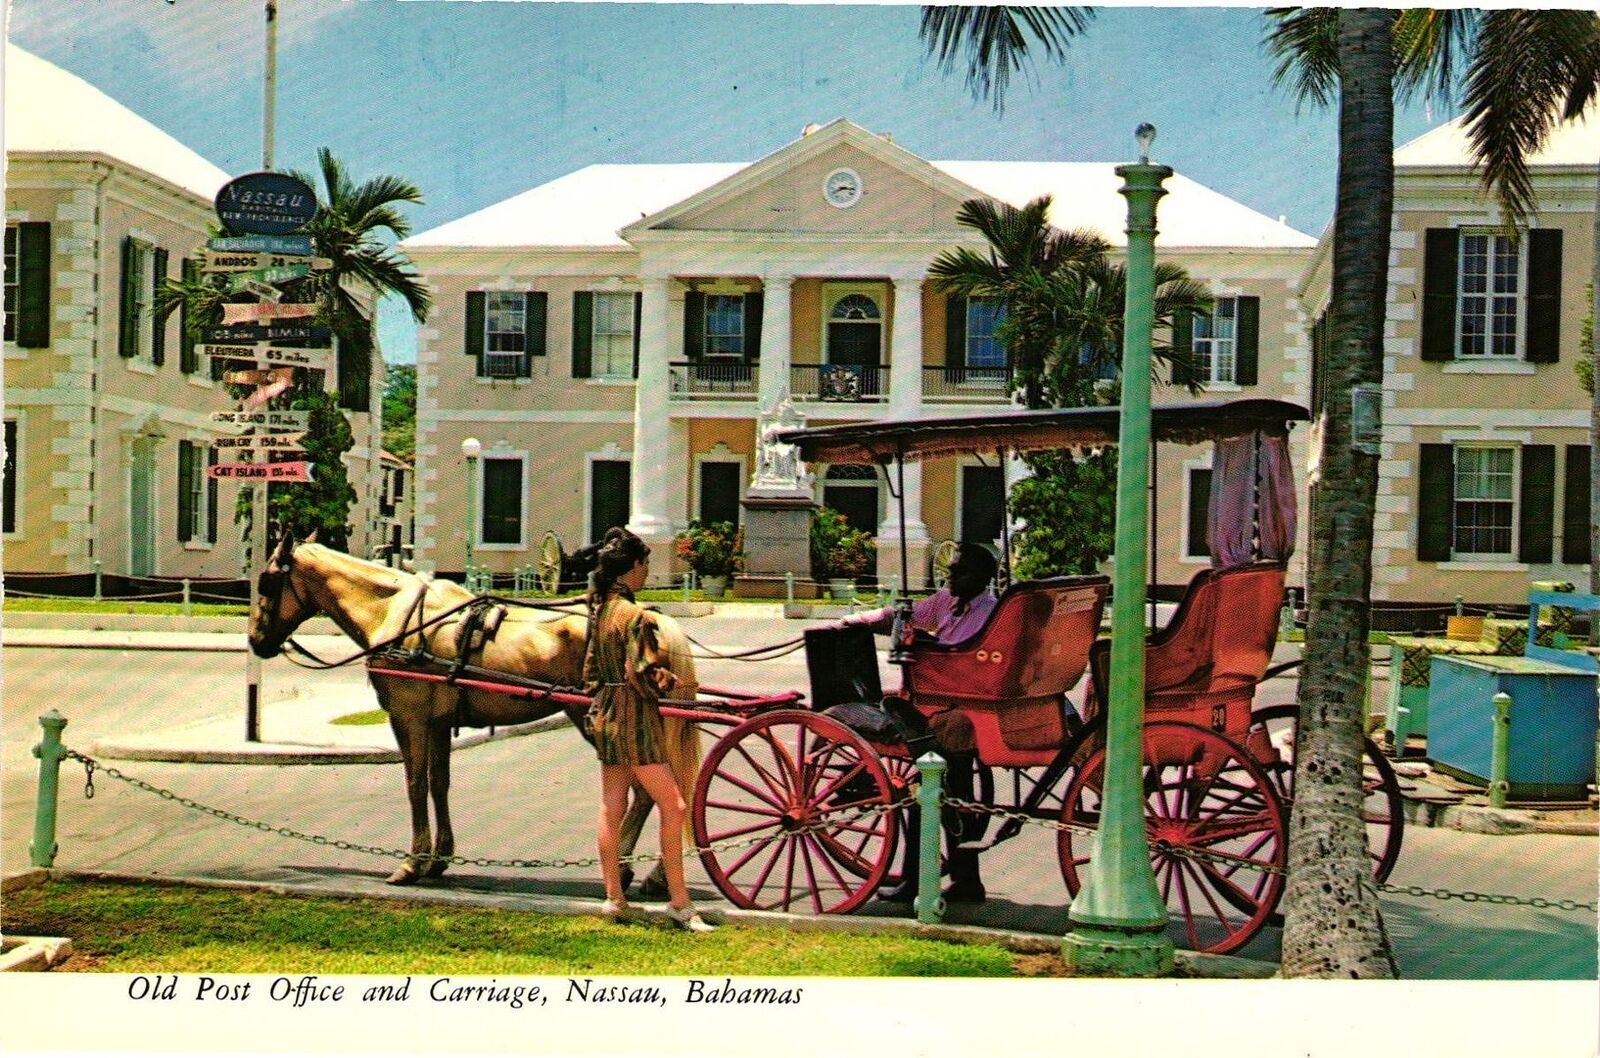 Vintage Postcard 4x6- Old Post Office and Carriage, Nassau, Bahamas 1960-80s